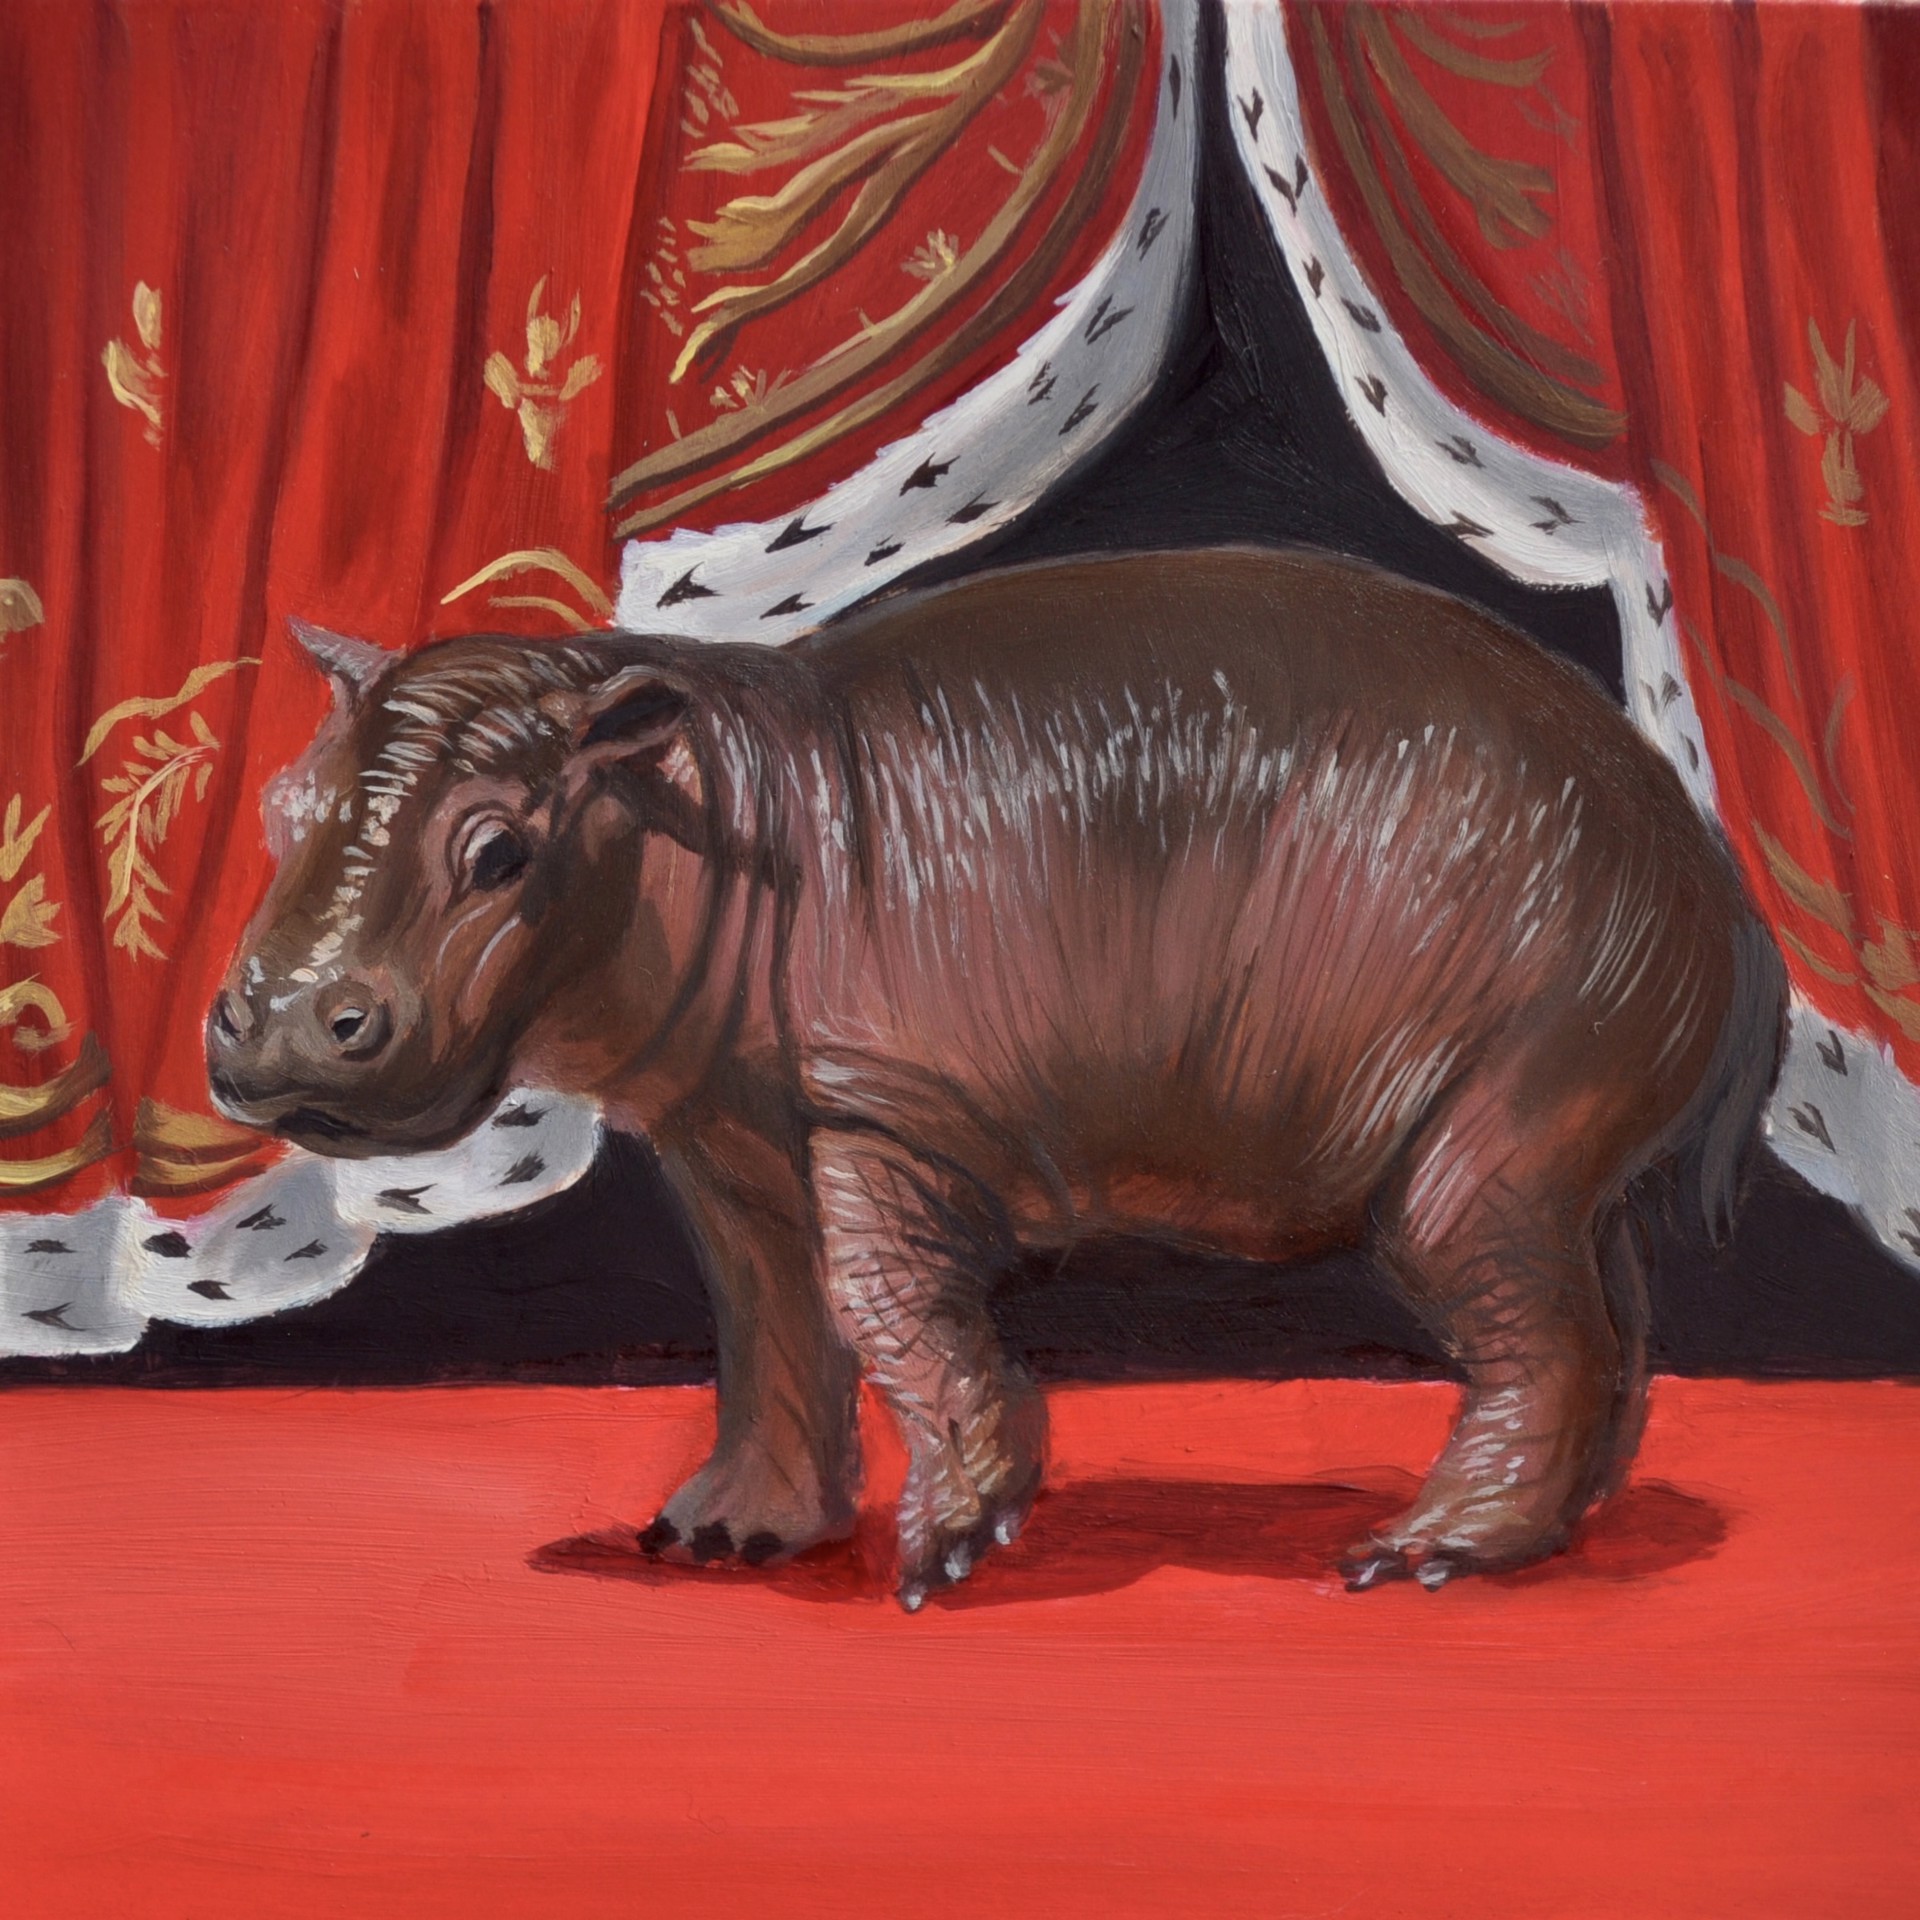 Baby Hippo by Robin Hextrum